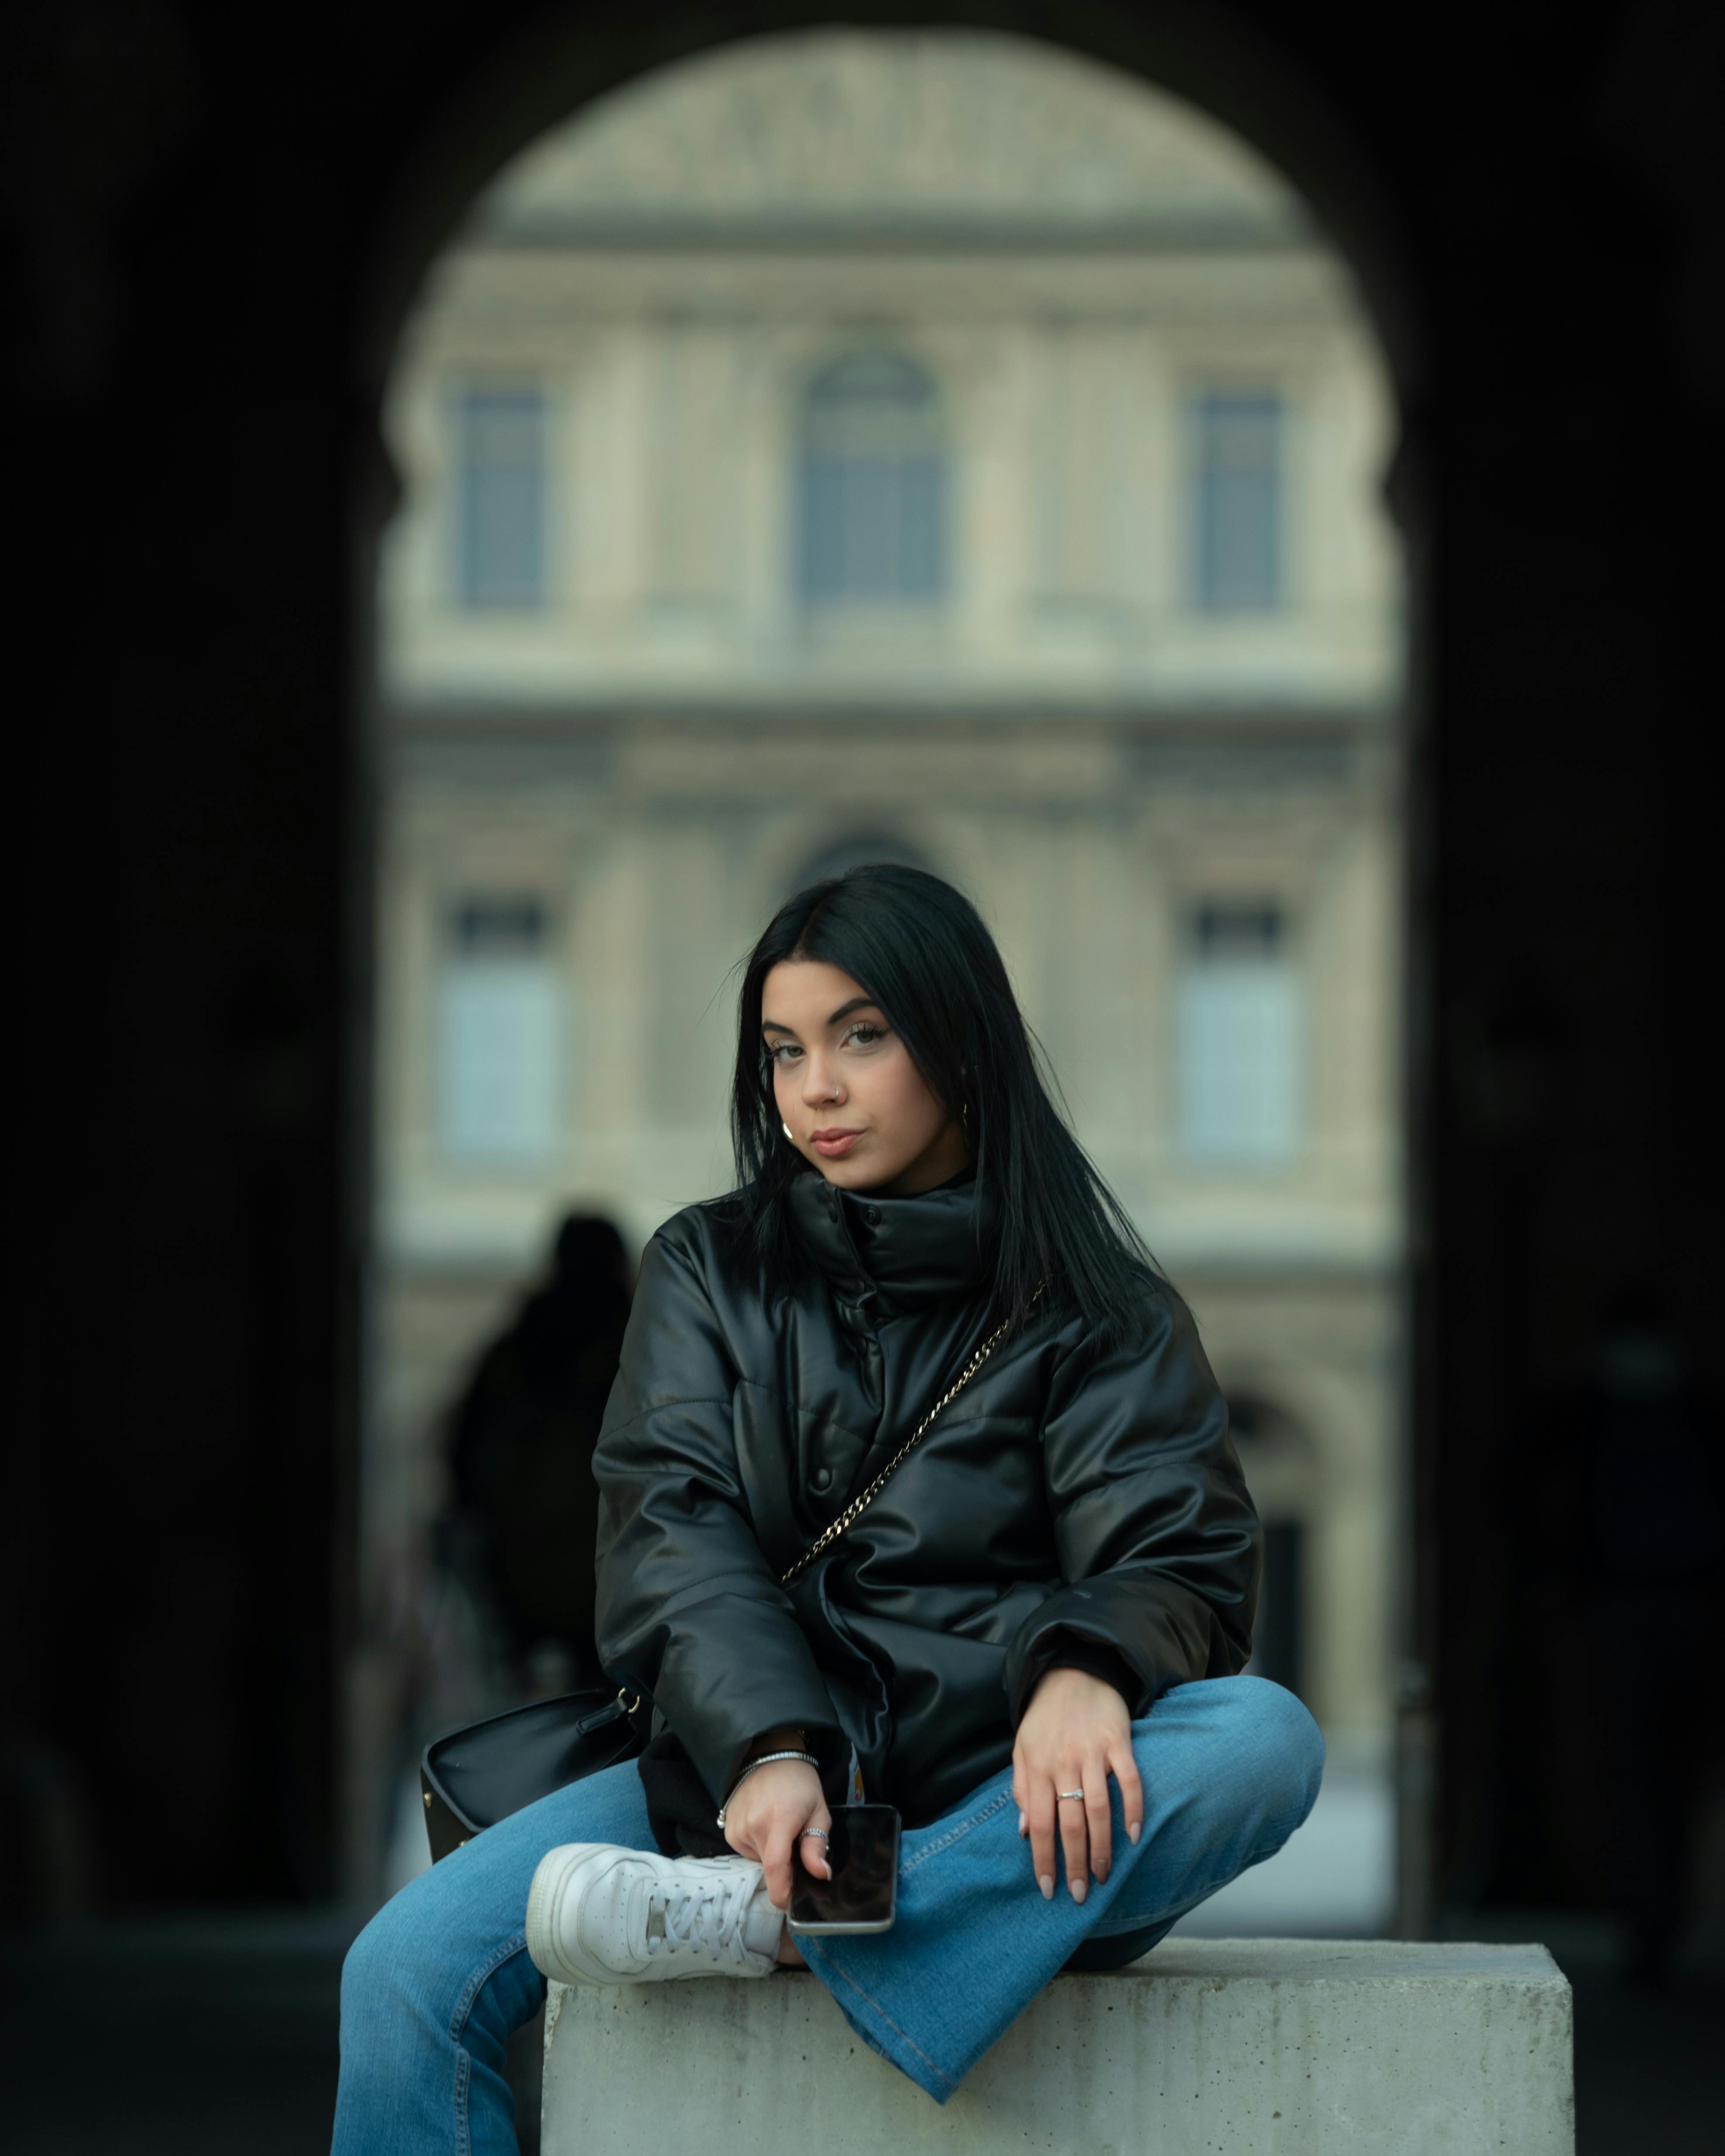 Beautiful young girl wearing black jacket sitting in the street stock photo